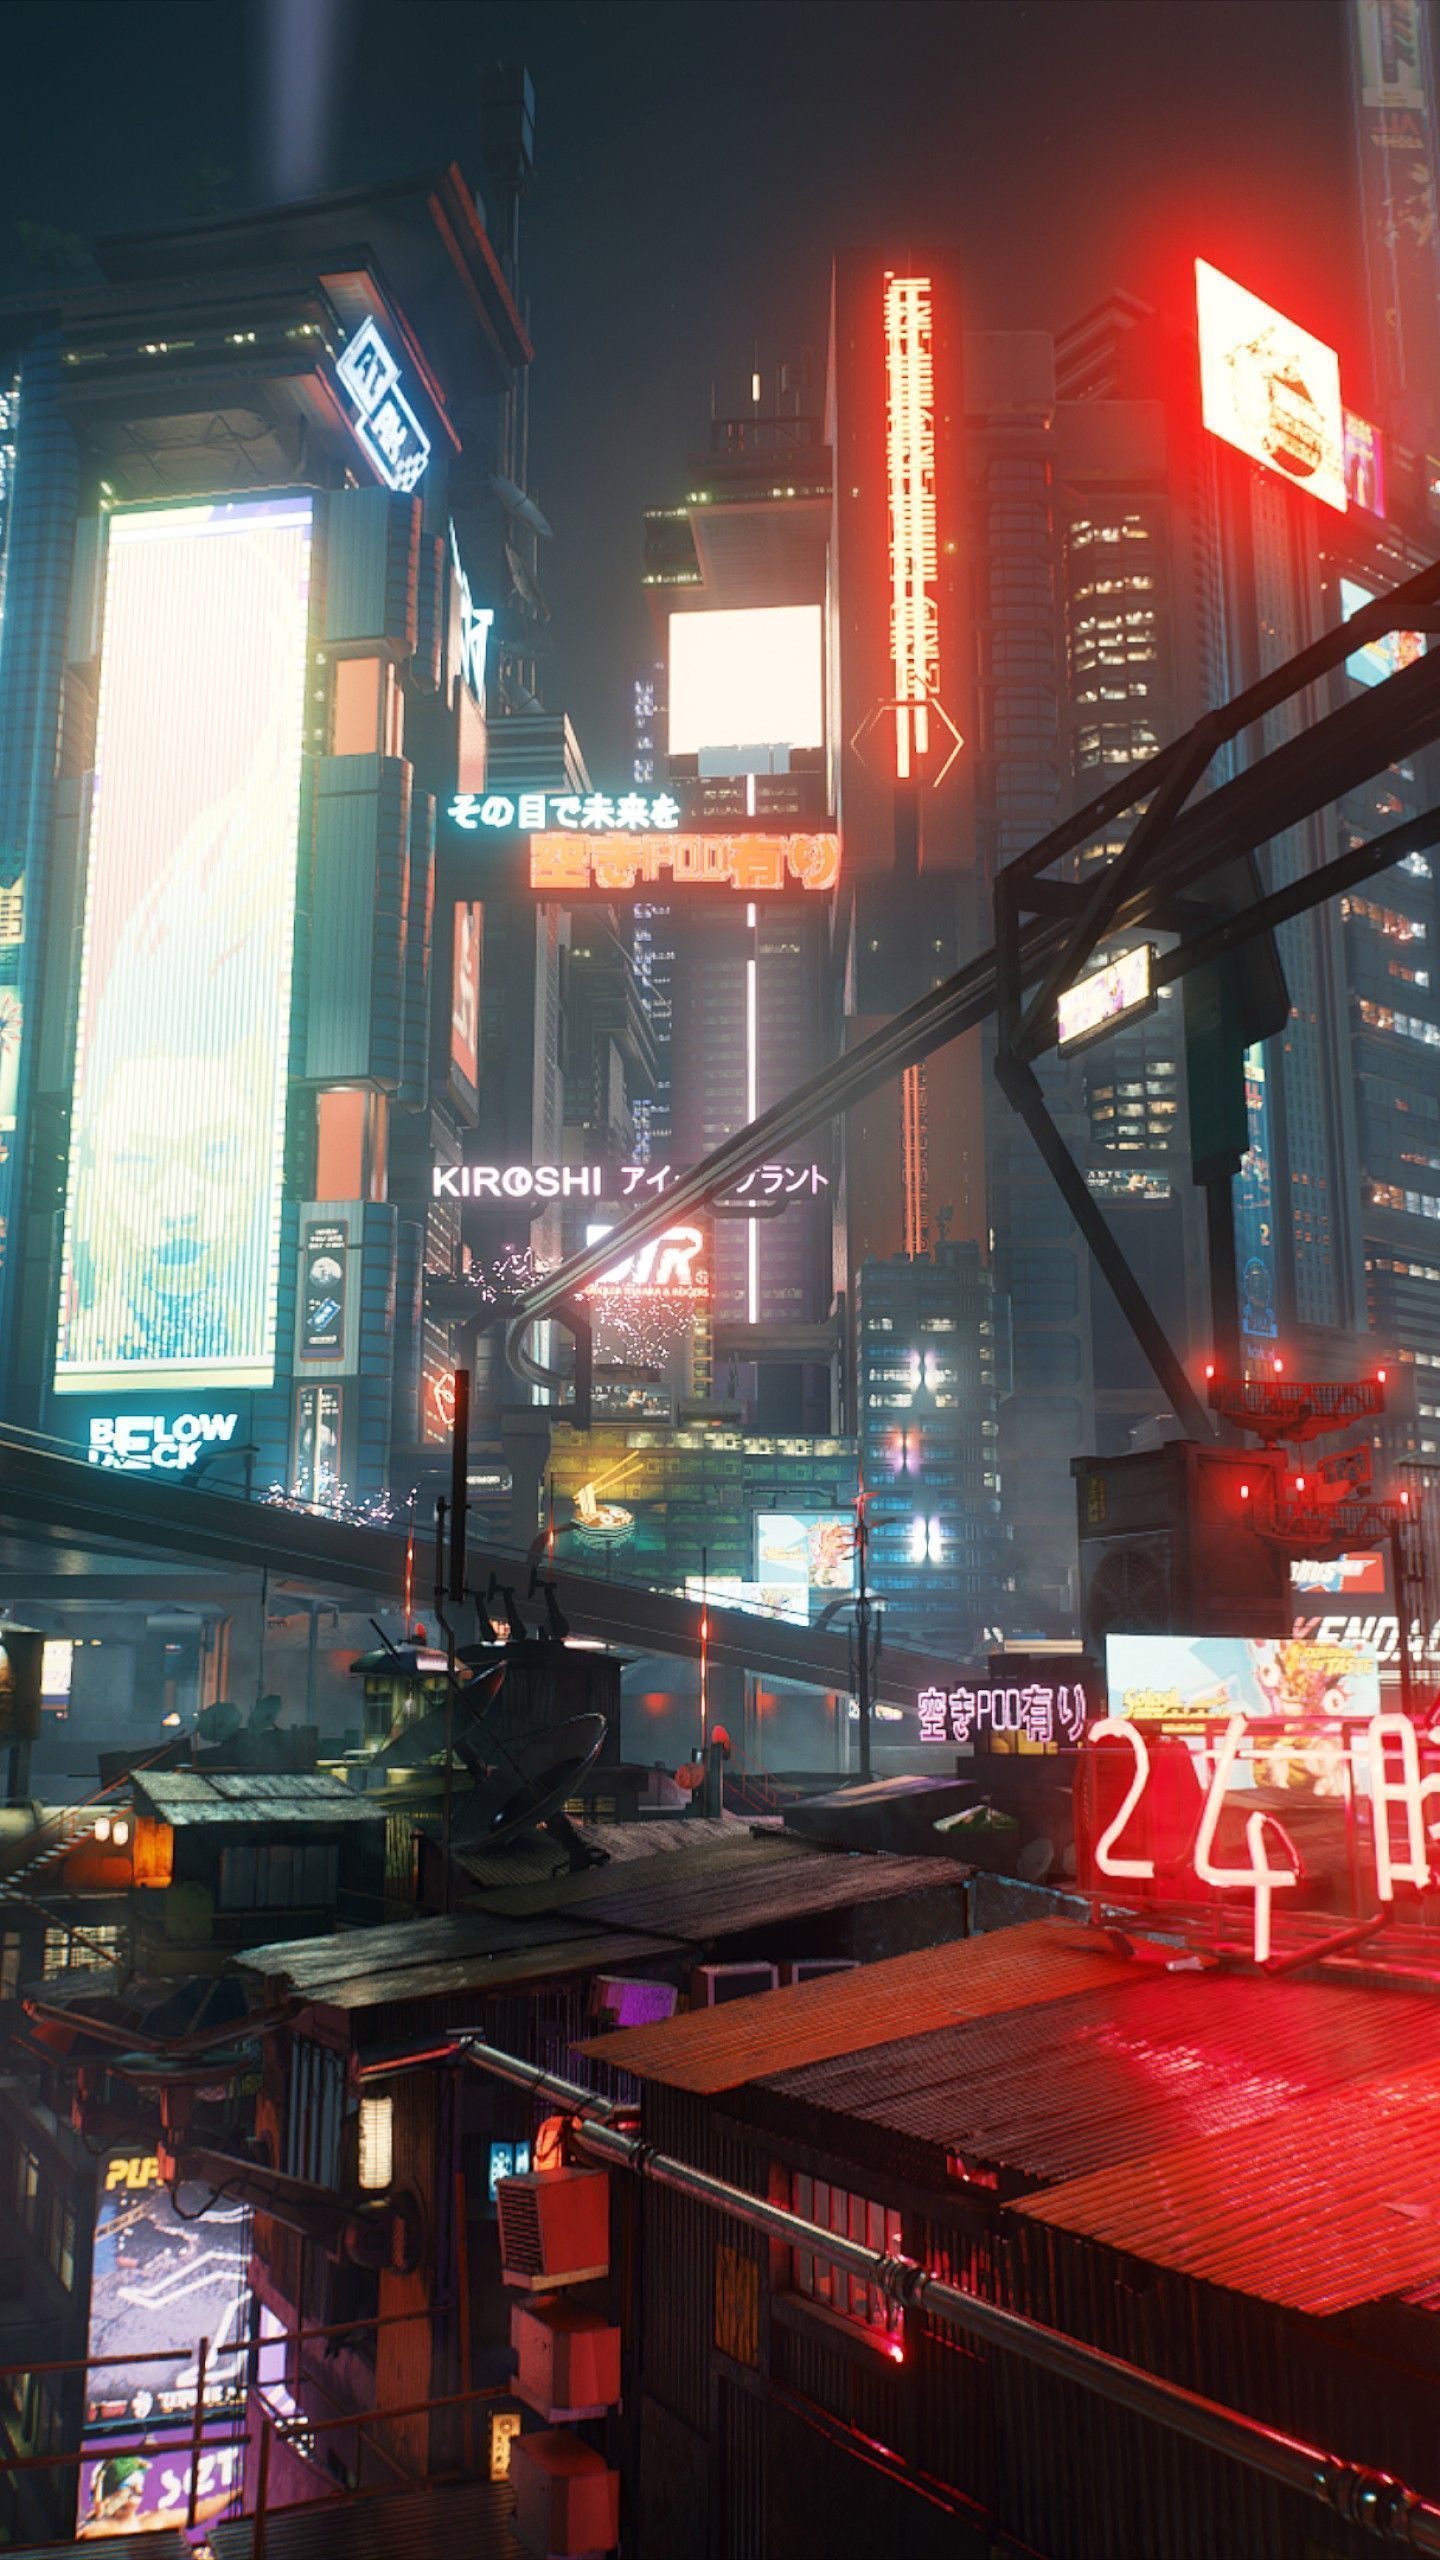 A city with neon lights and buildings - Cyberpunk, Cyberpunk 2077